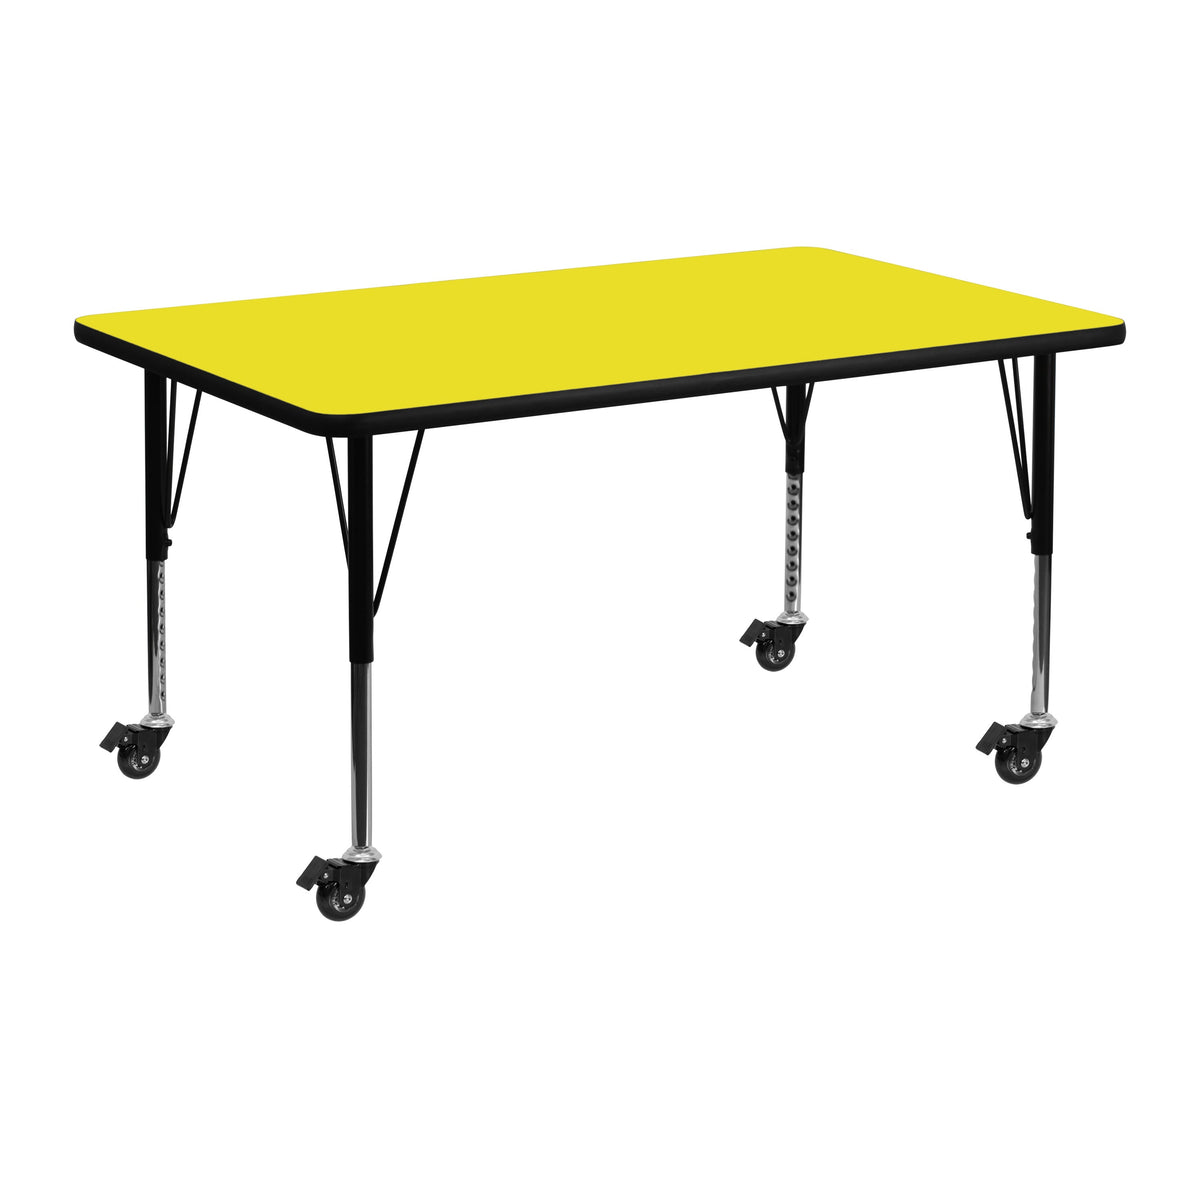 Yellow |#| Mobile 24inchW x 48inchL Yellow HP Laminate Activity Table - Adjustable Short Legs